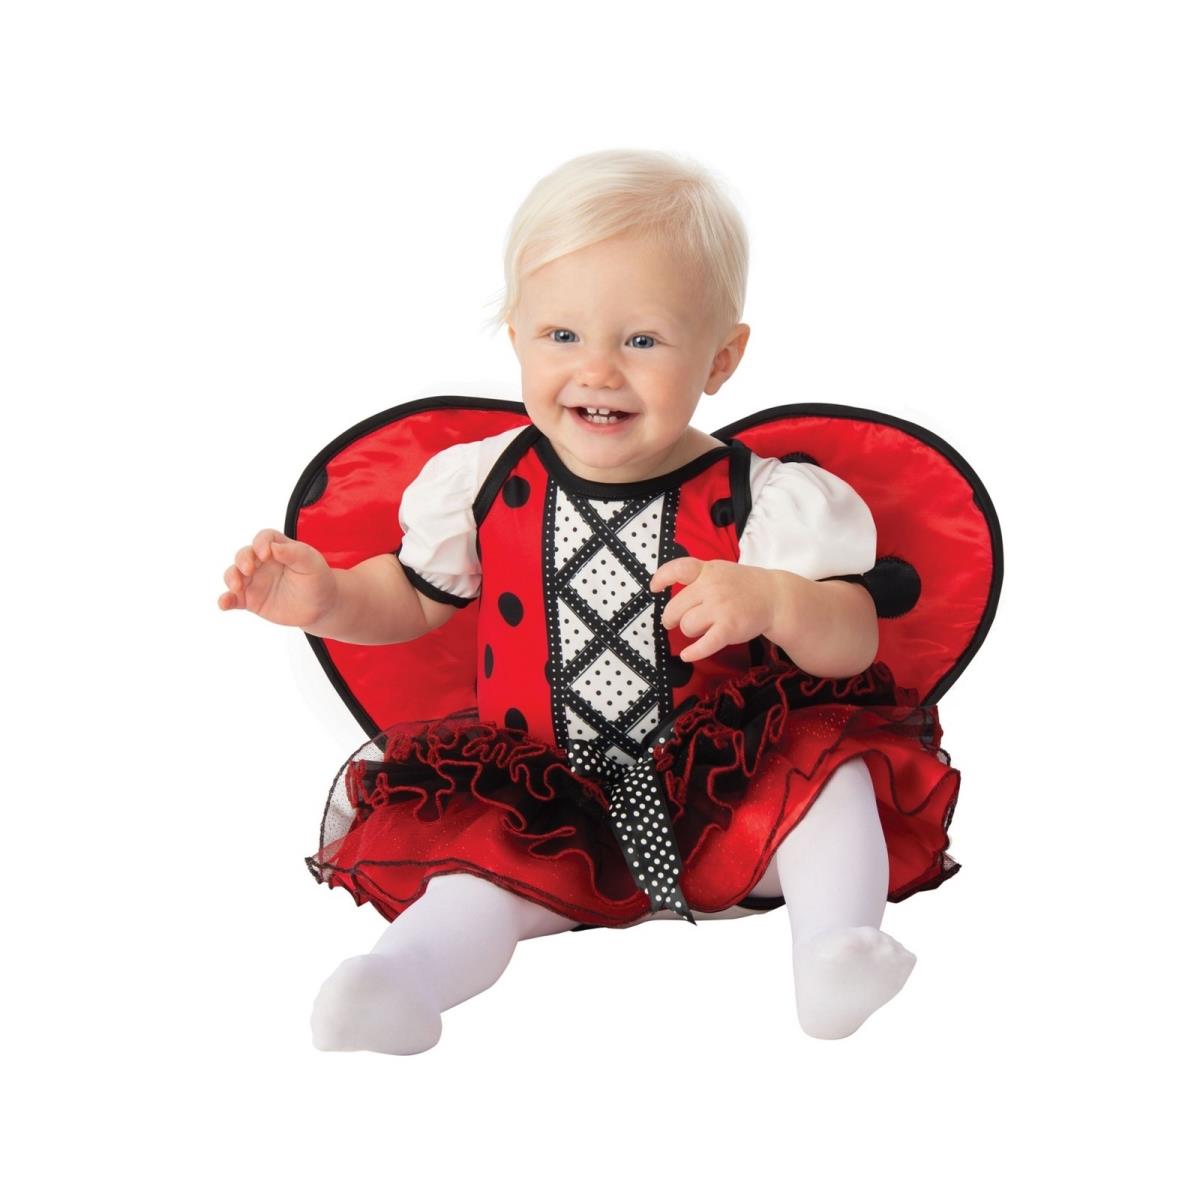 Picture of Rubies 405617 Ladybug Costume - Infant